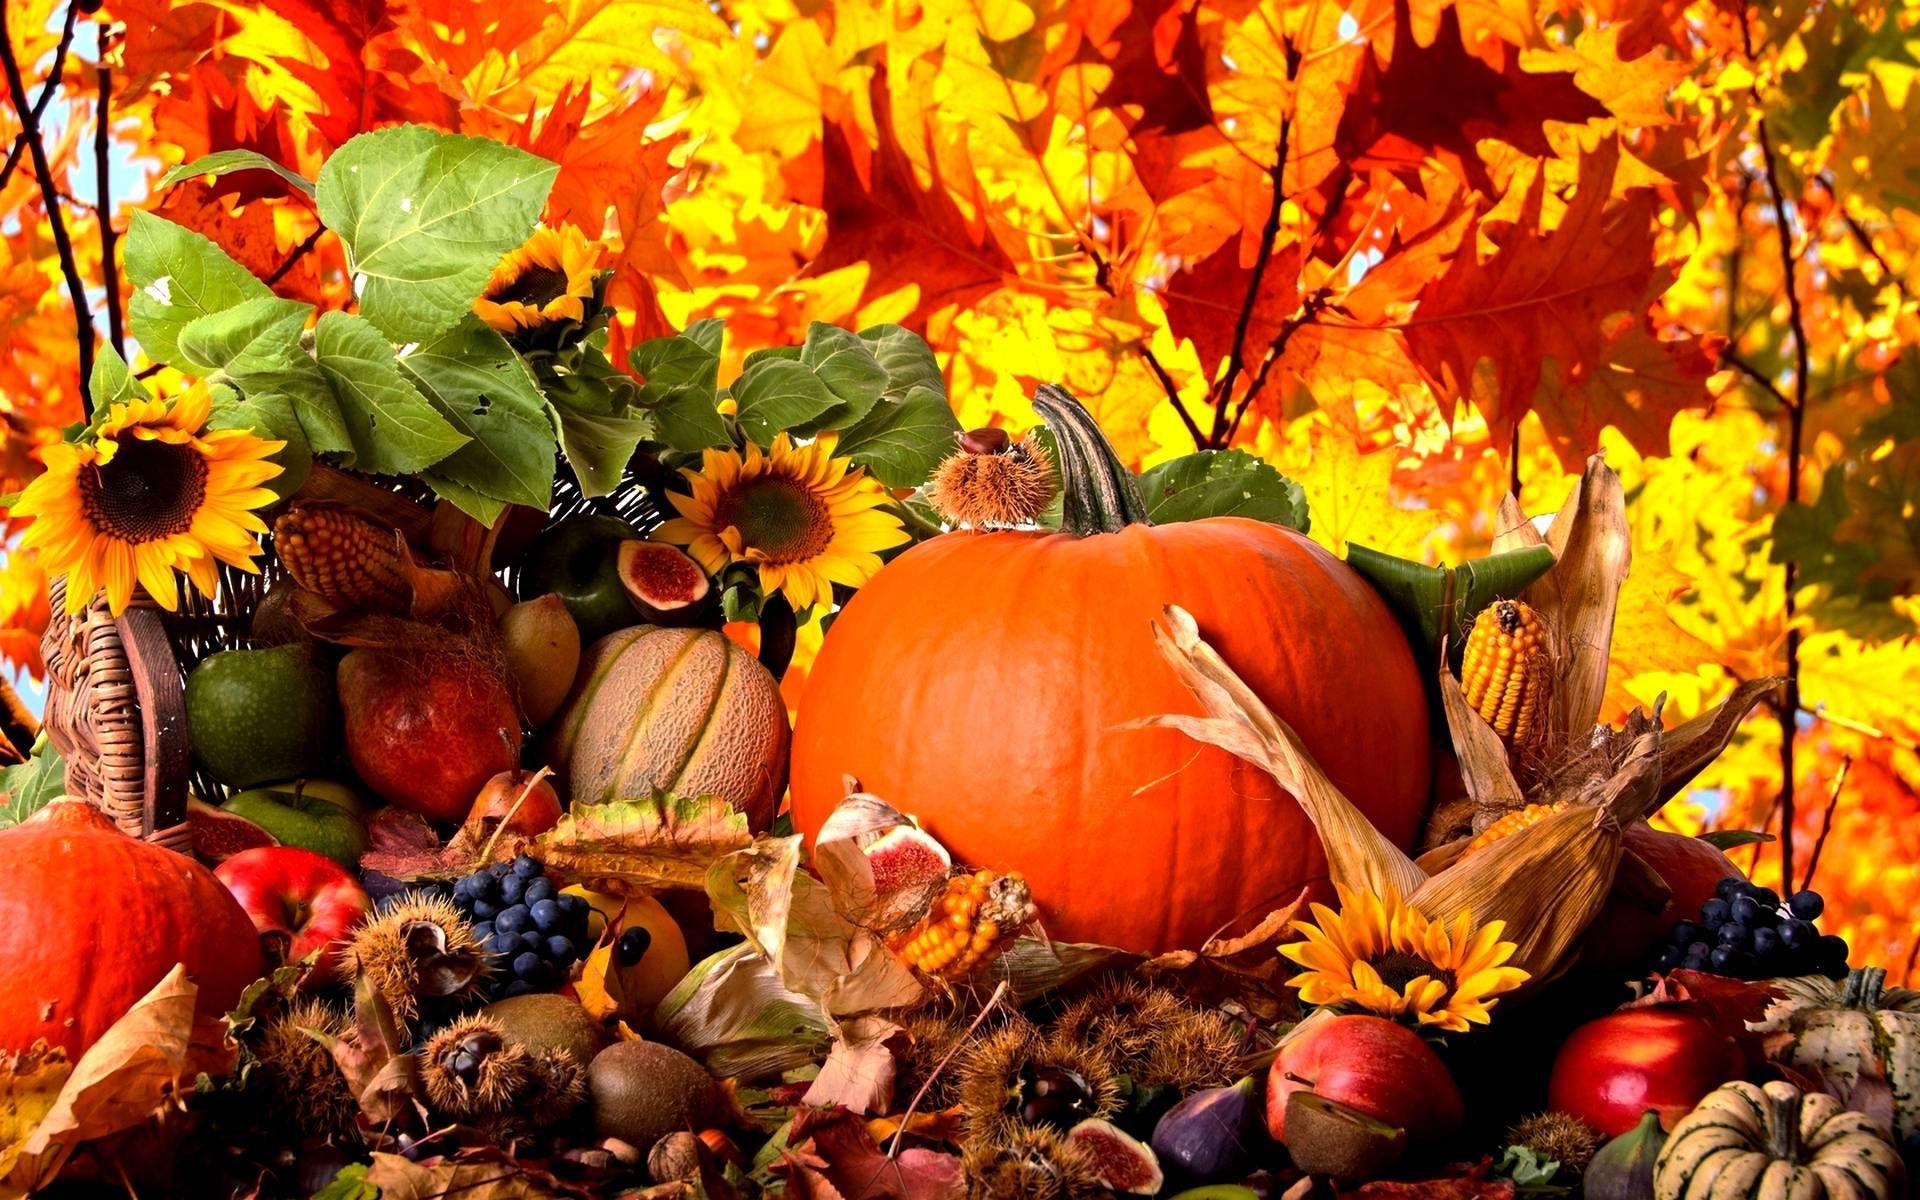 Download Fall Harvest Wallpaper High Quality for iphone, pc desktop, android, or mac.. Thanksgiving picture, Thanksgiving wallpaper, Free thanksgiving wallpaper